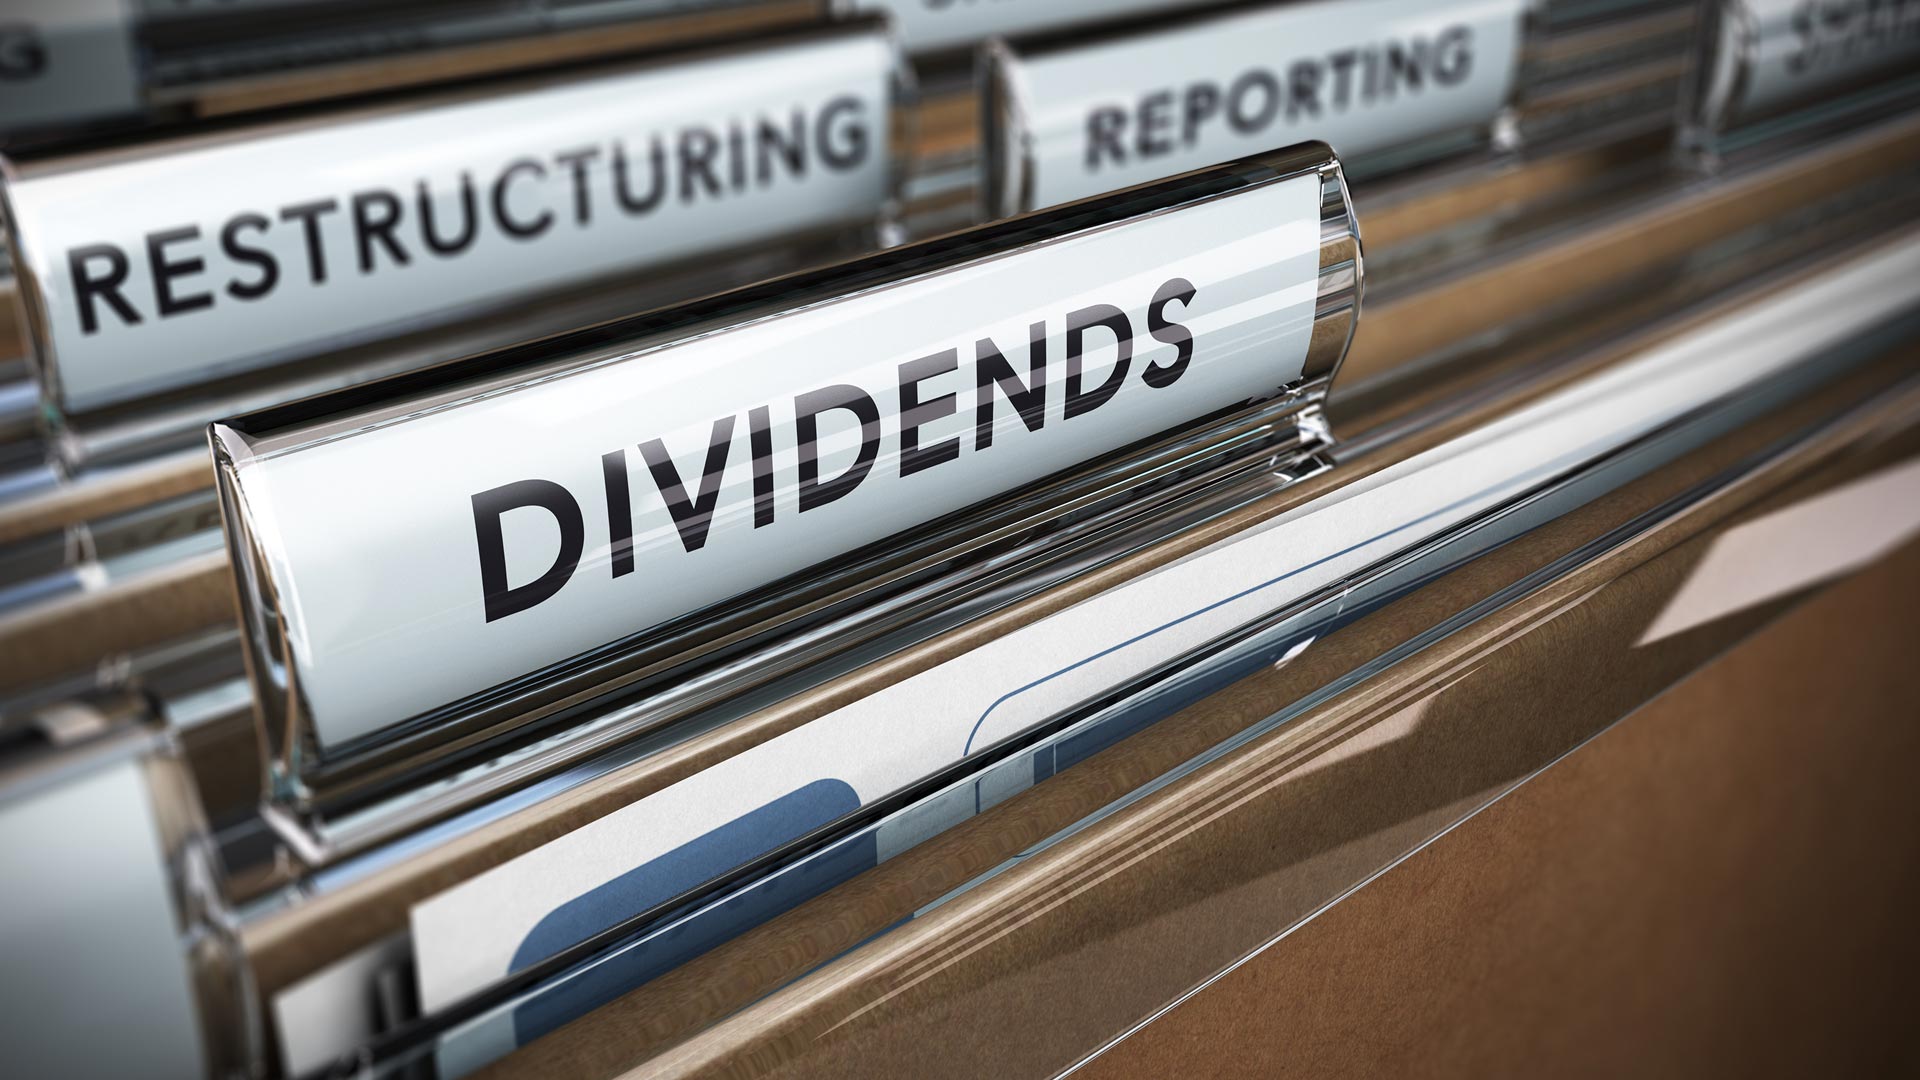 Mukand Ltd | Unclaimed Dividends Pertaining to the Shareholder Community